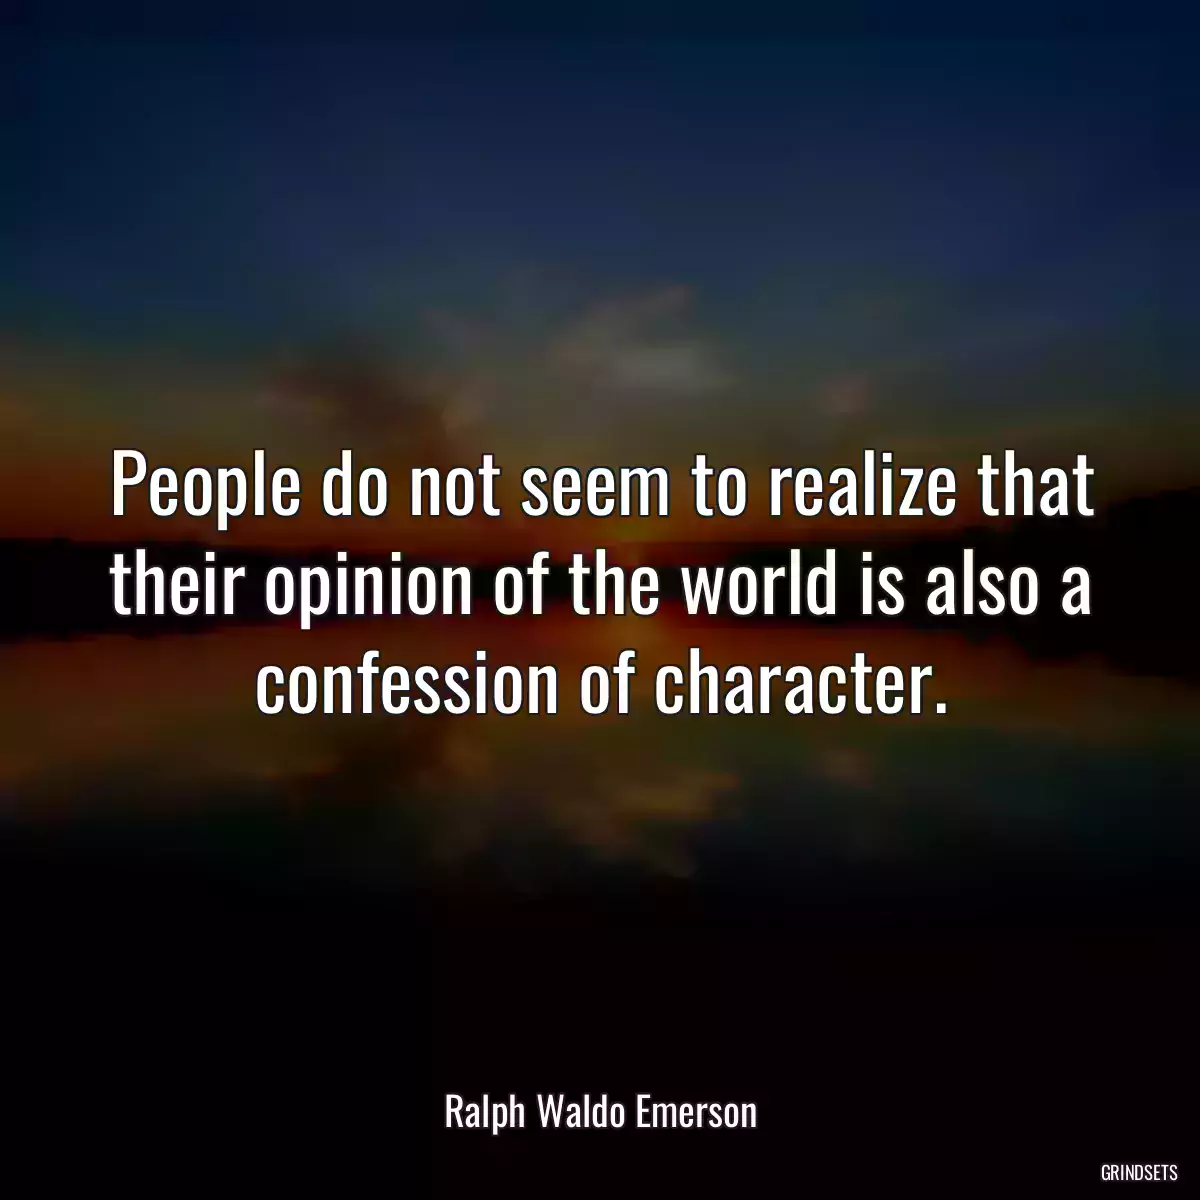 People do not seem to realize that their opinion of the world is also a confession of character.